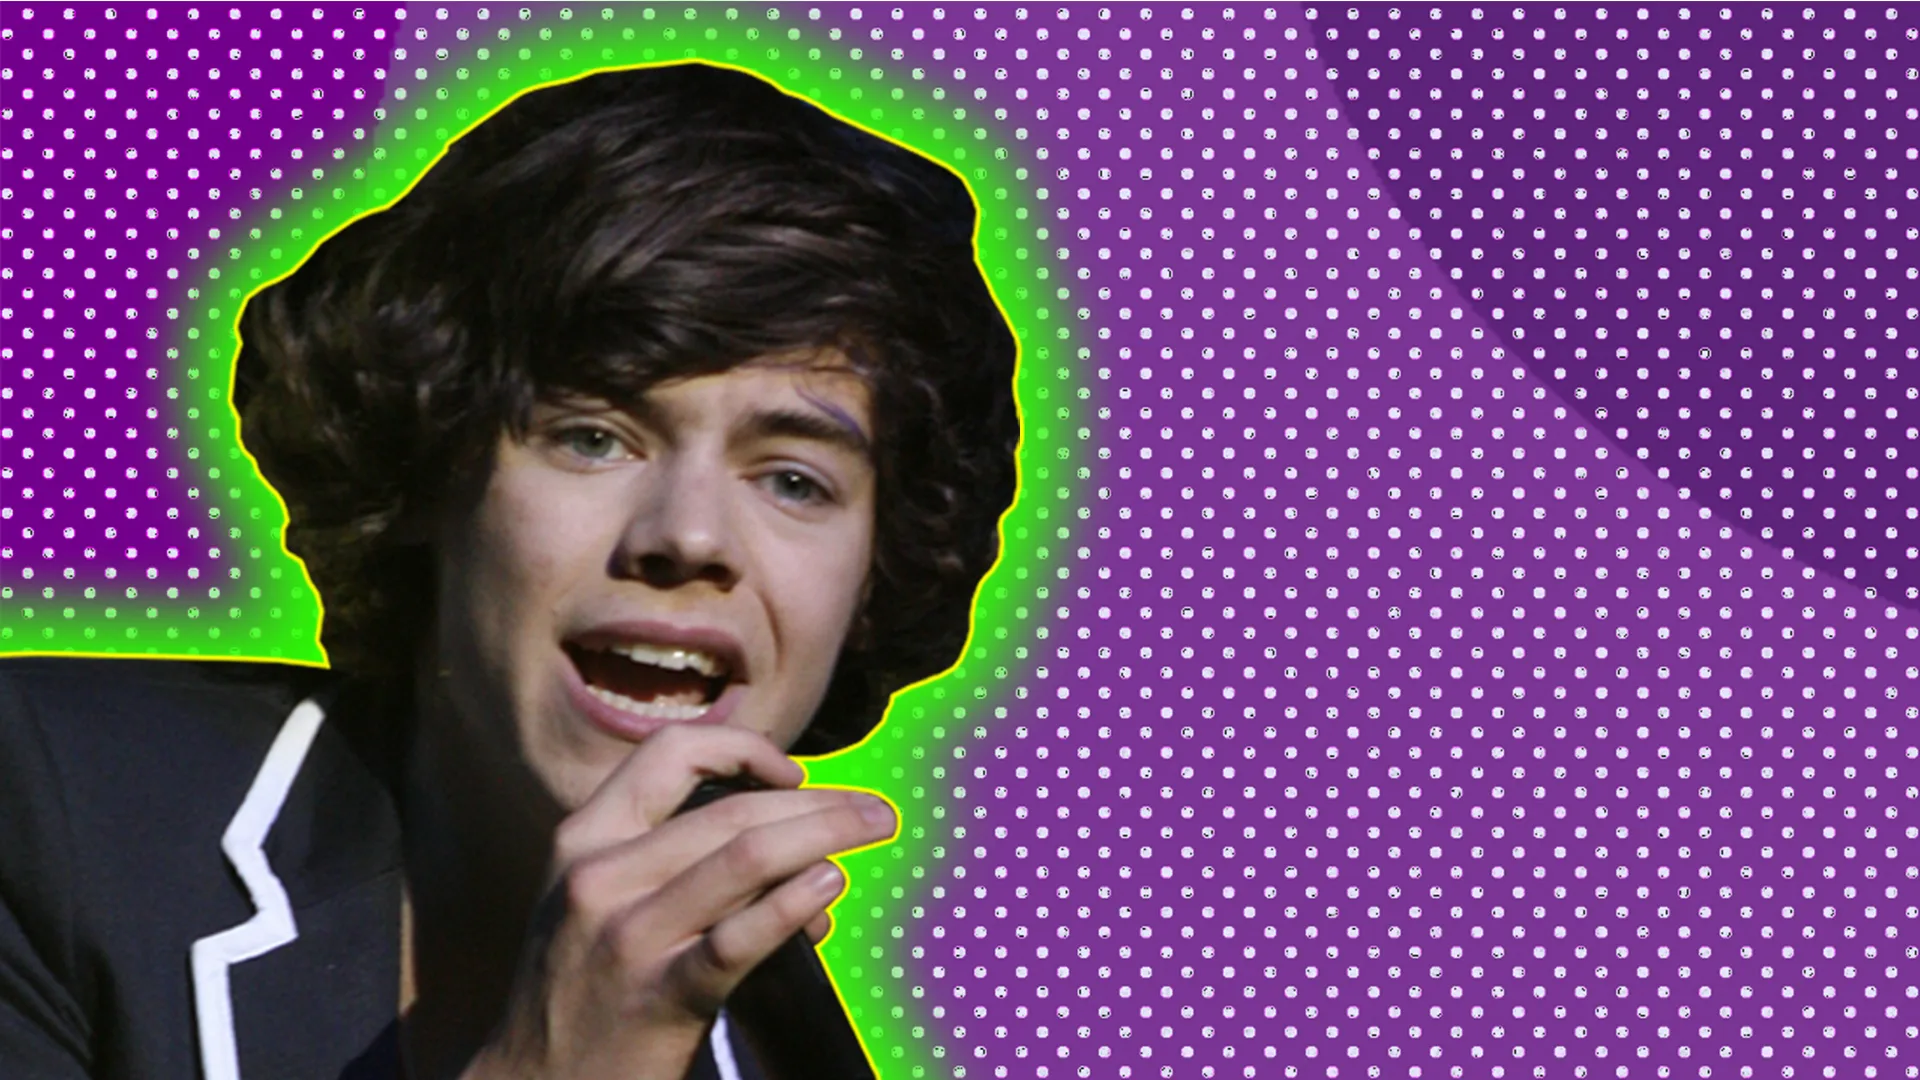 Harry Styles singing - in graphic house style